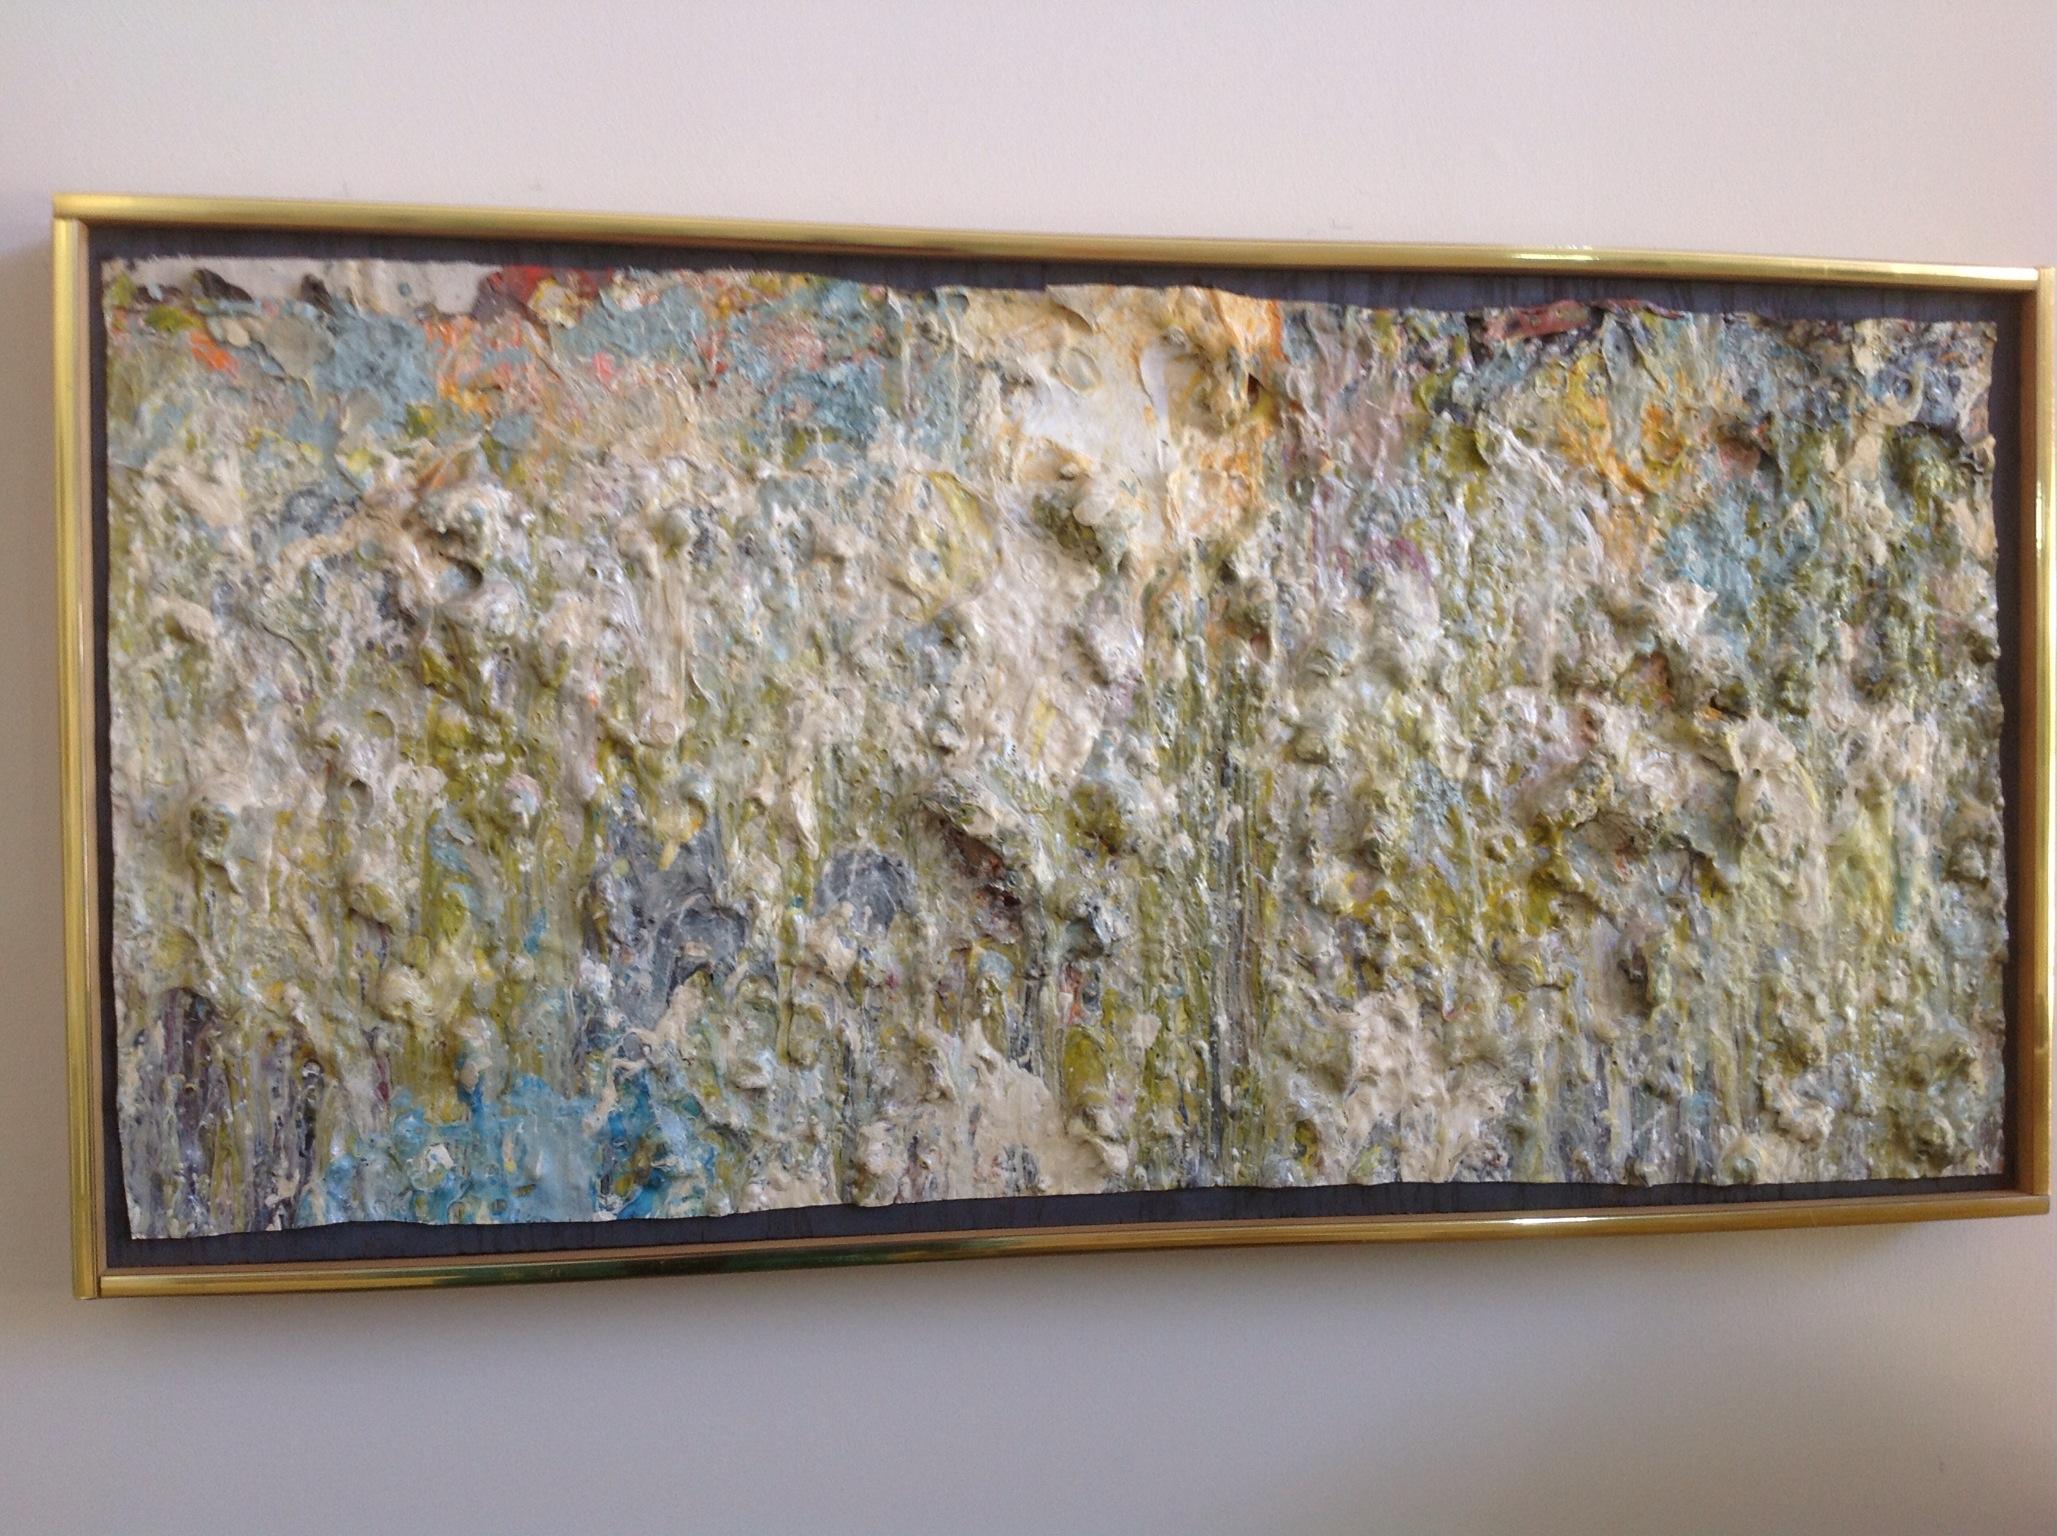 Untitled (1984) colorful abstract texture - Painting by Larry Poons